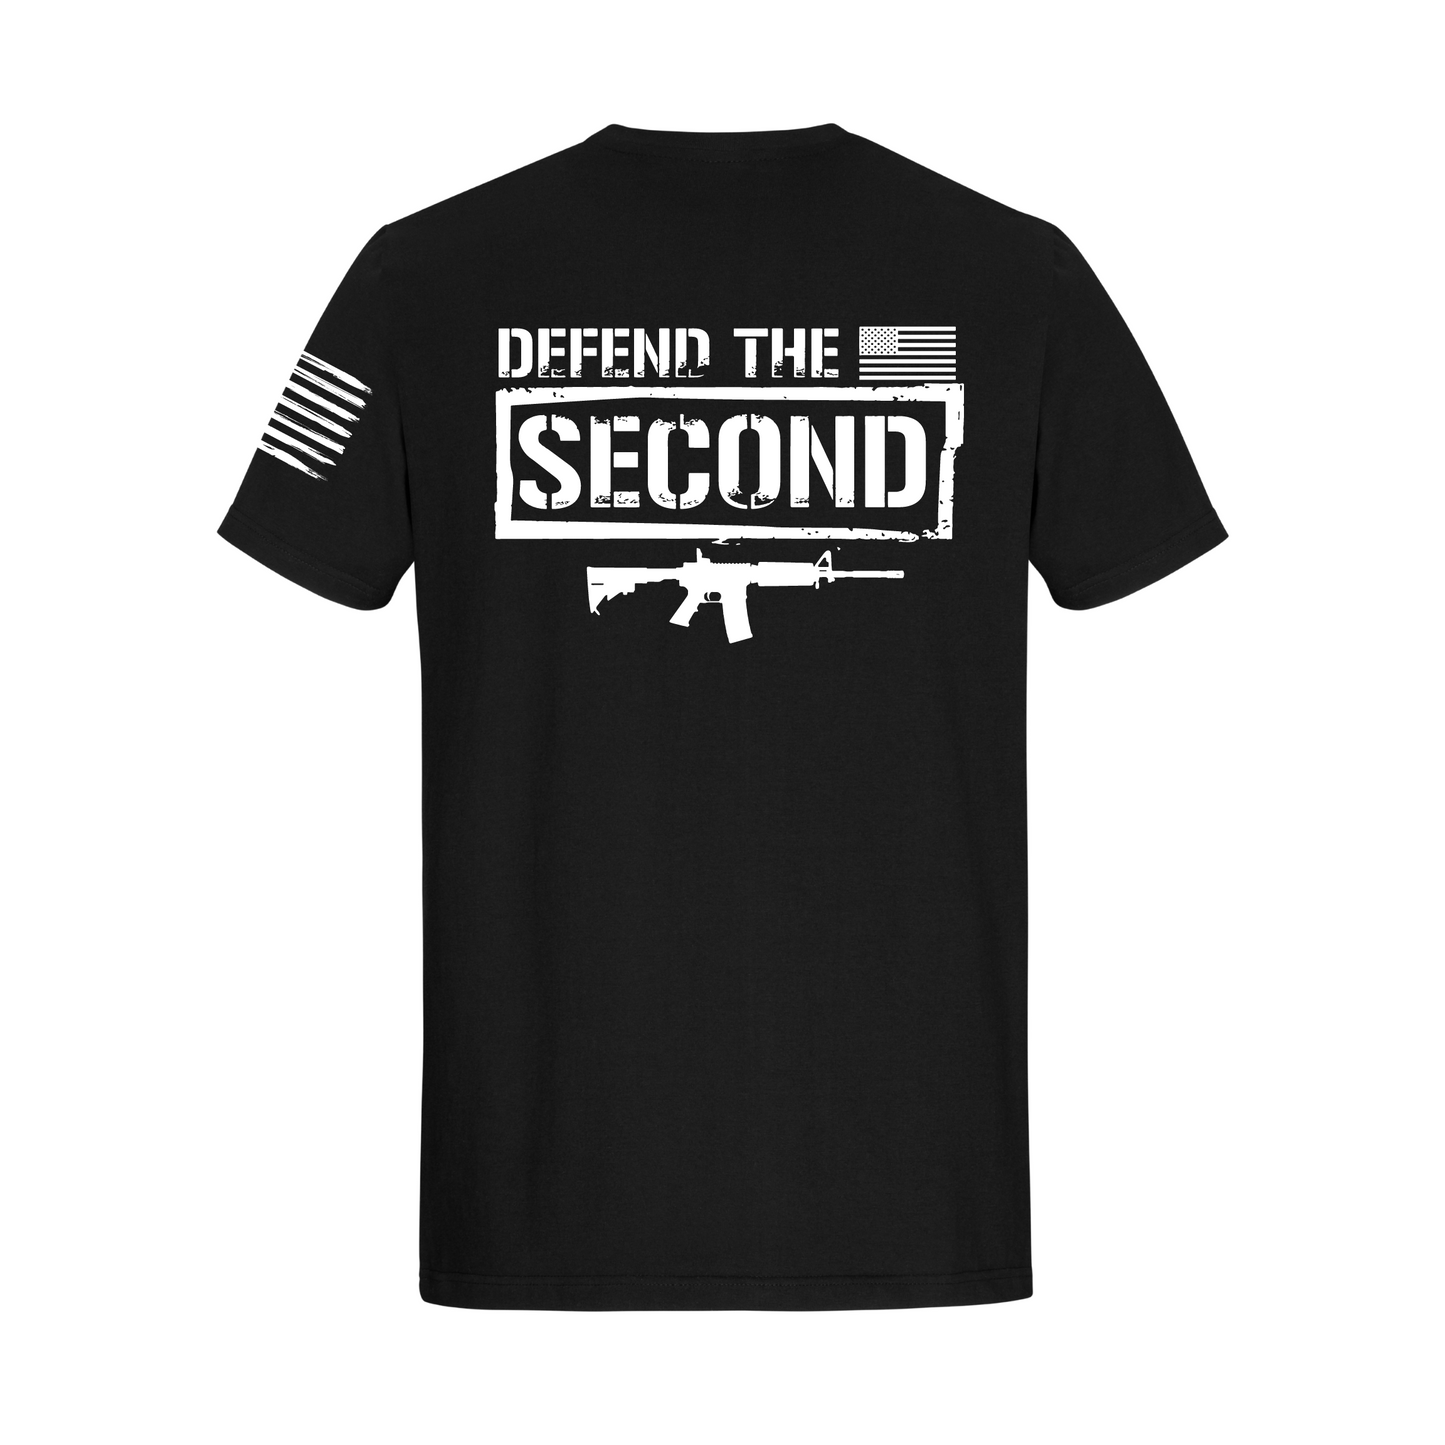 Defend the Second Adult Short Sleeve Tee